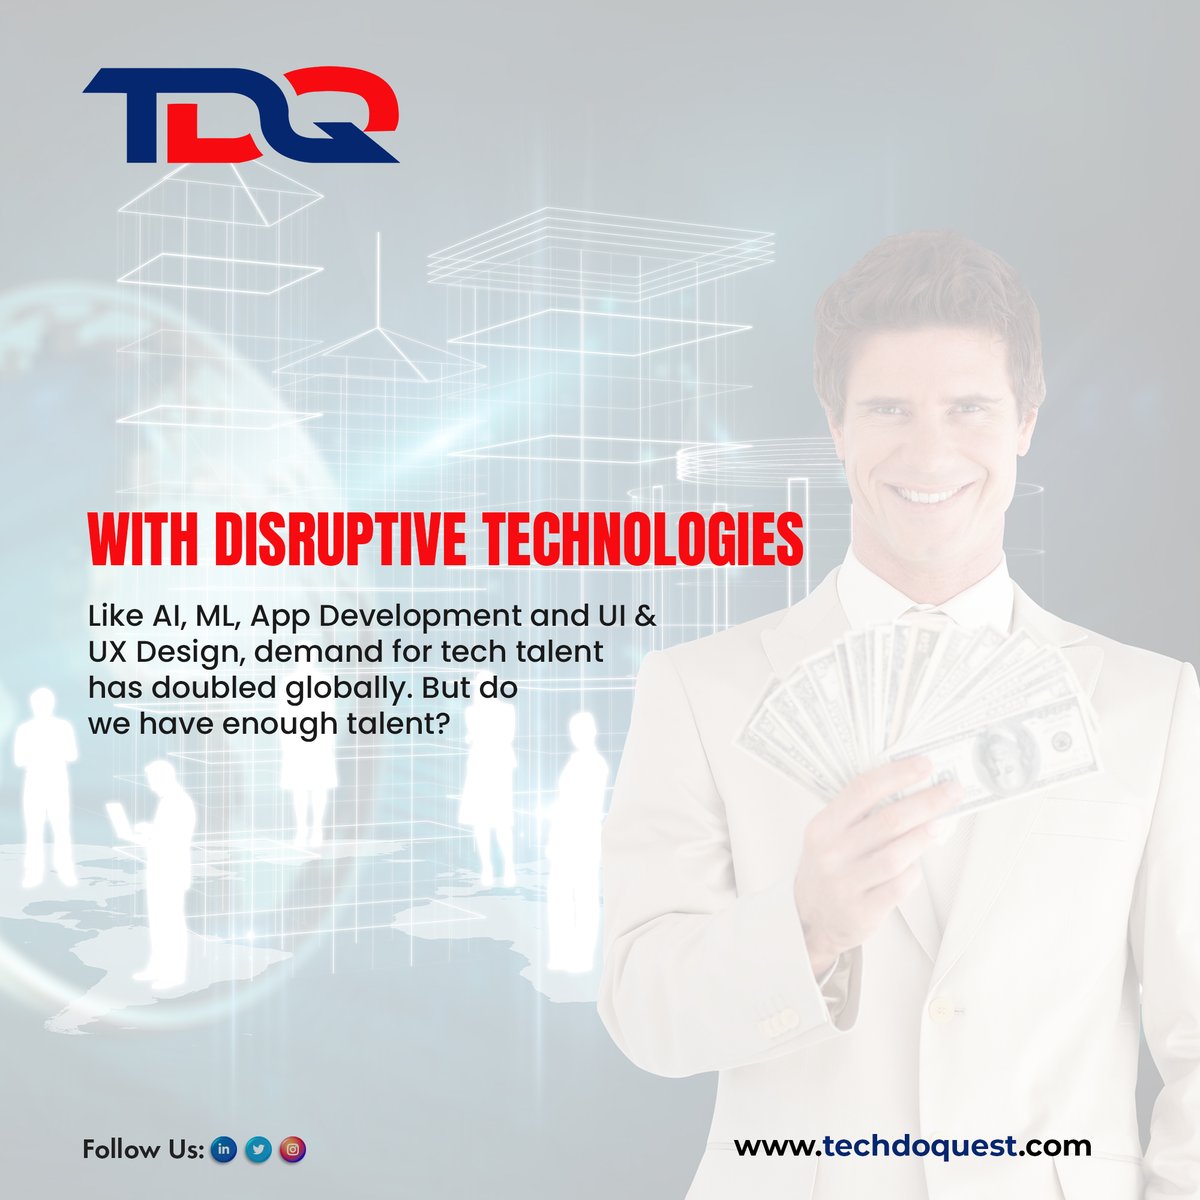 Global demand for tech talent has doubled due to disruptive technologies, but the ❓remains :
is there enough talent to meet this demand?
Here’s a thread 🧵…

#TechTalentCrunch #NewAgeSkillsShortage #OutdatedCurriculum #InternshipMandatory  #ChallengingProjects #Techdoquest #TDQ